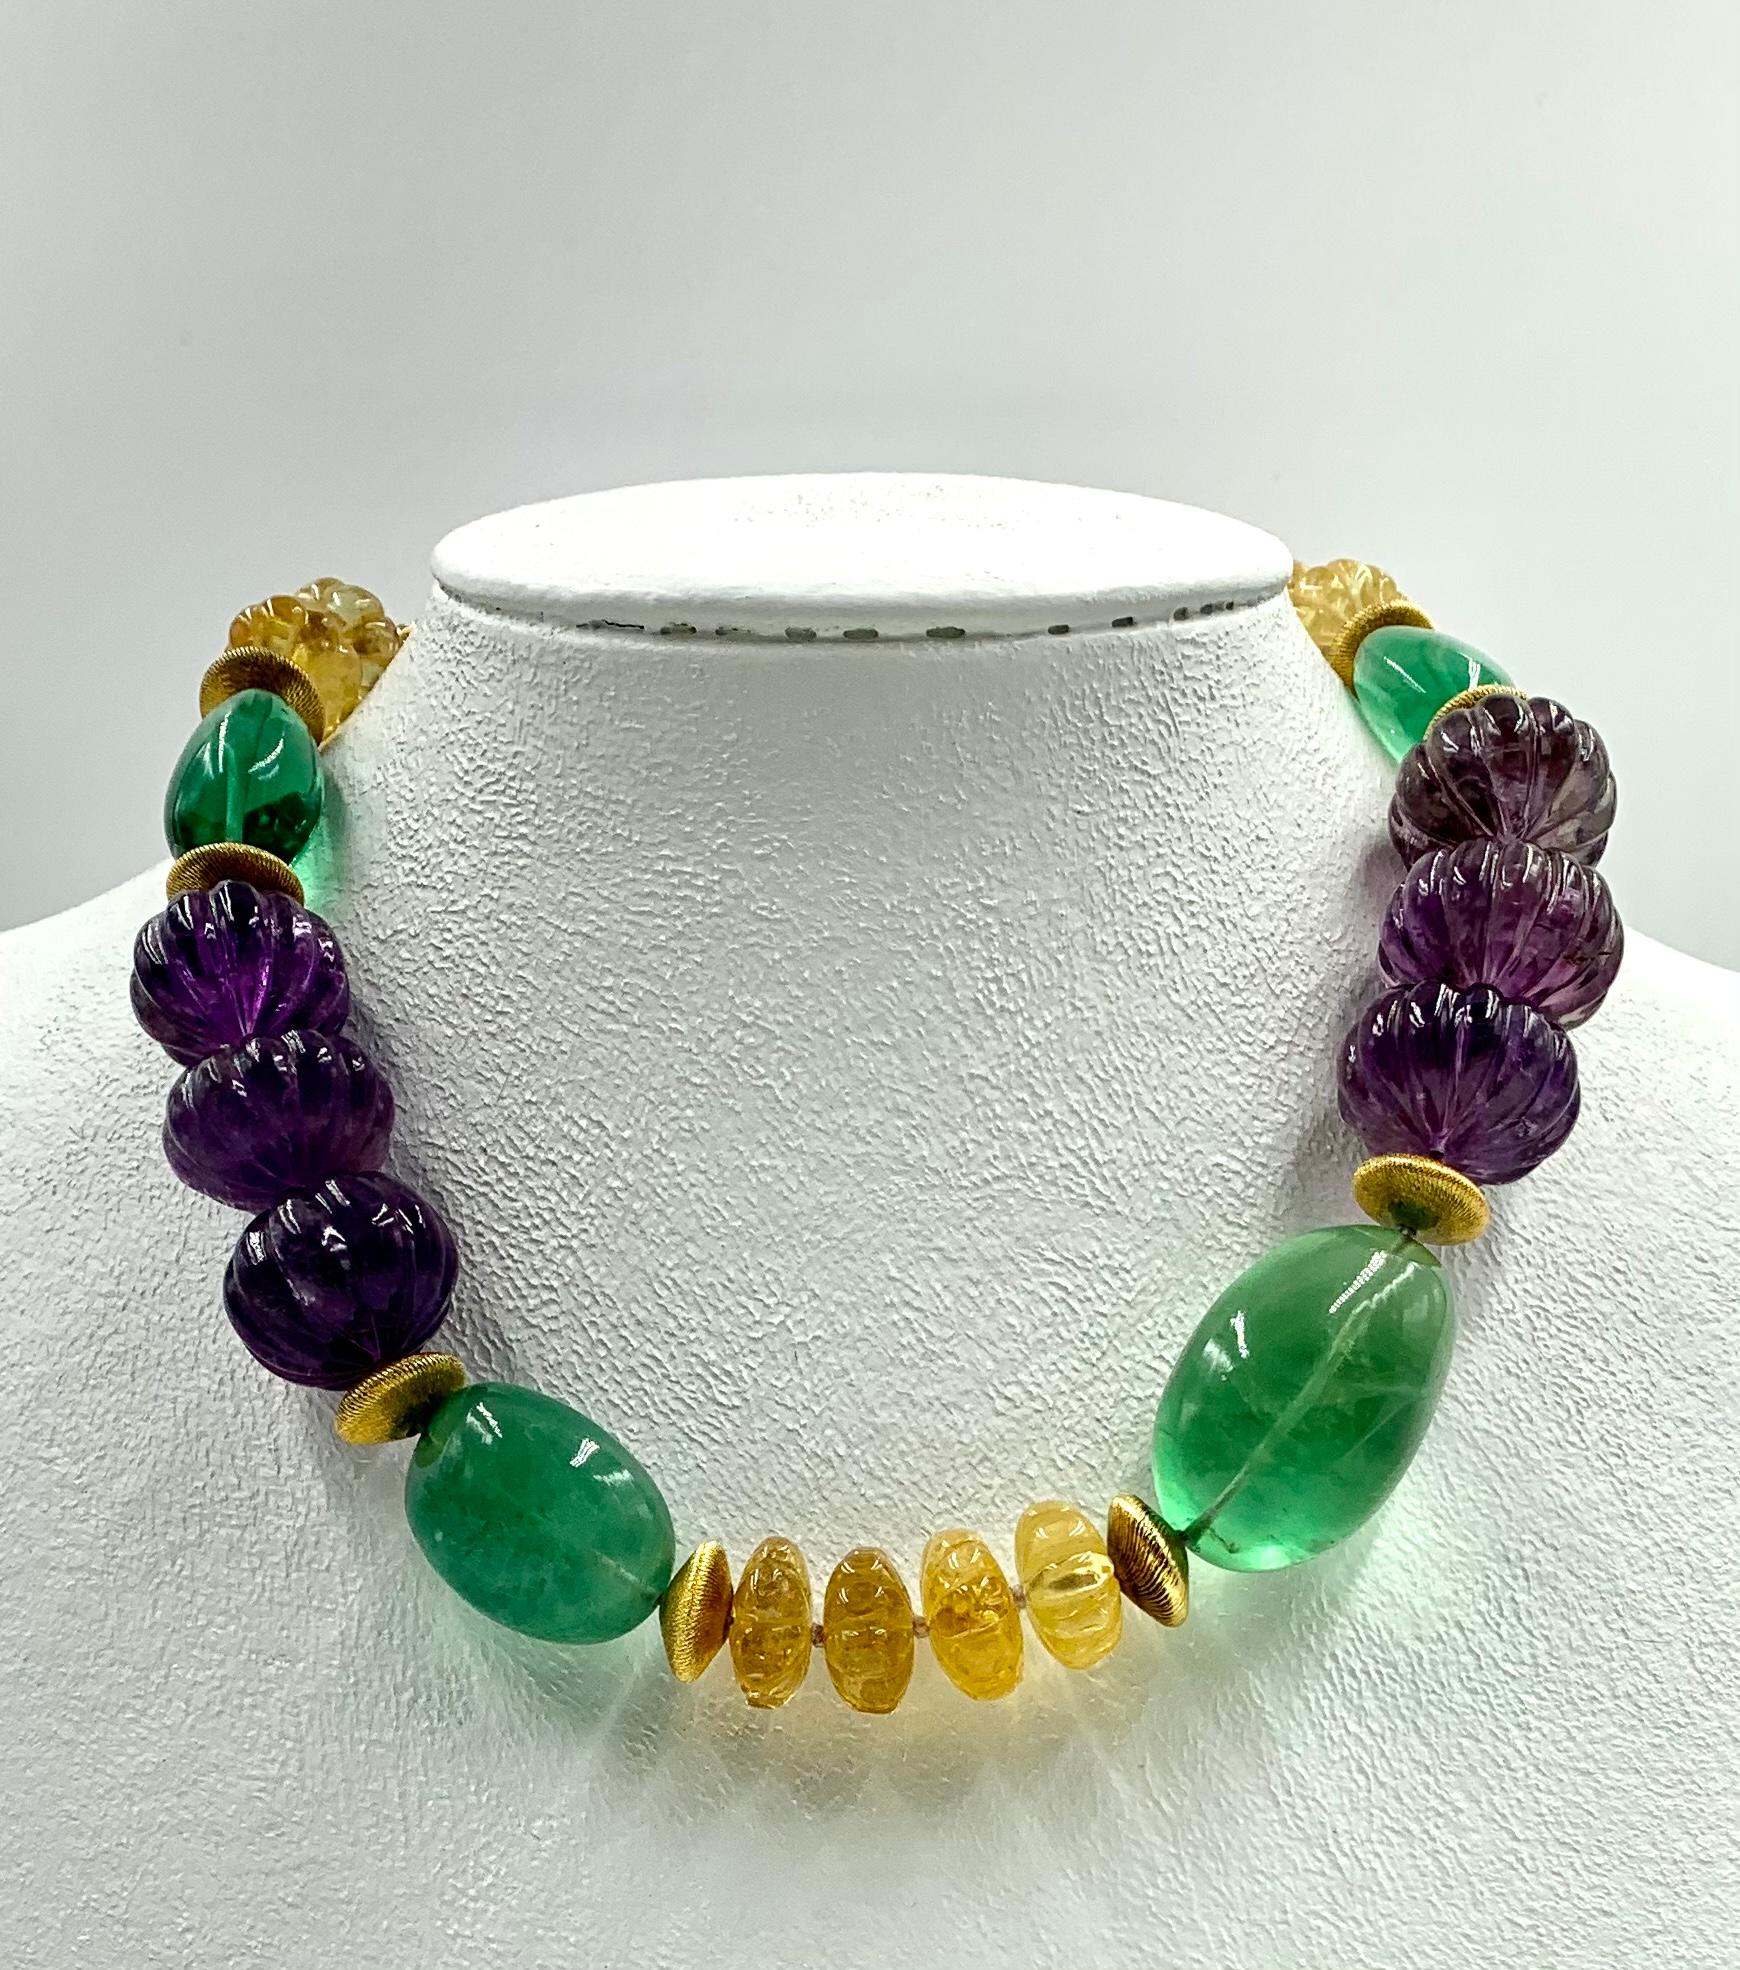 Vintage Iradj Moini Amethyst, Citrine, Fluorite and Gold-Plated Bead Necklace 6